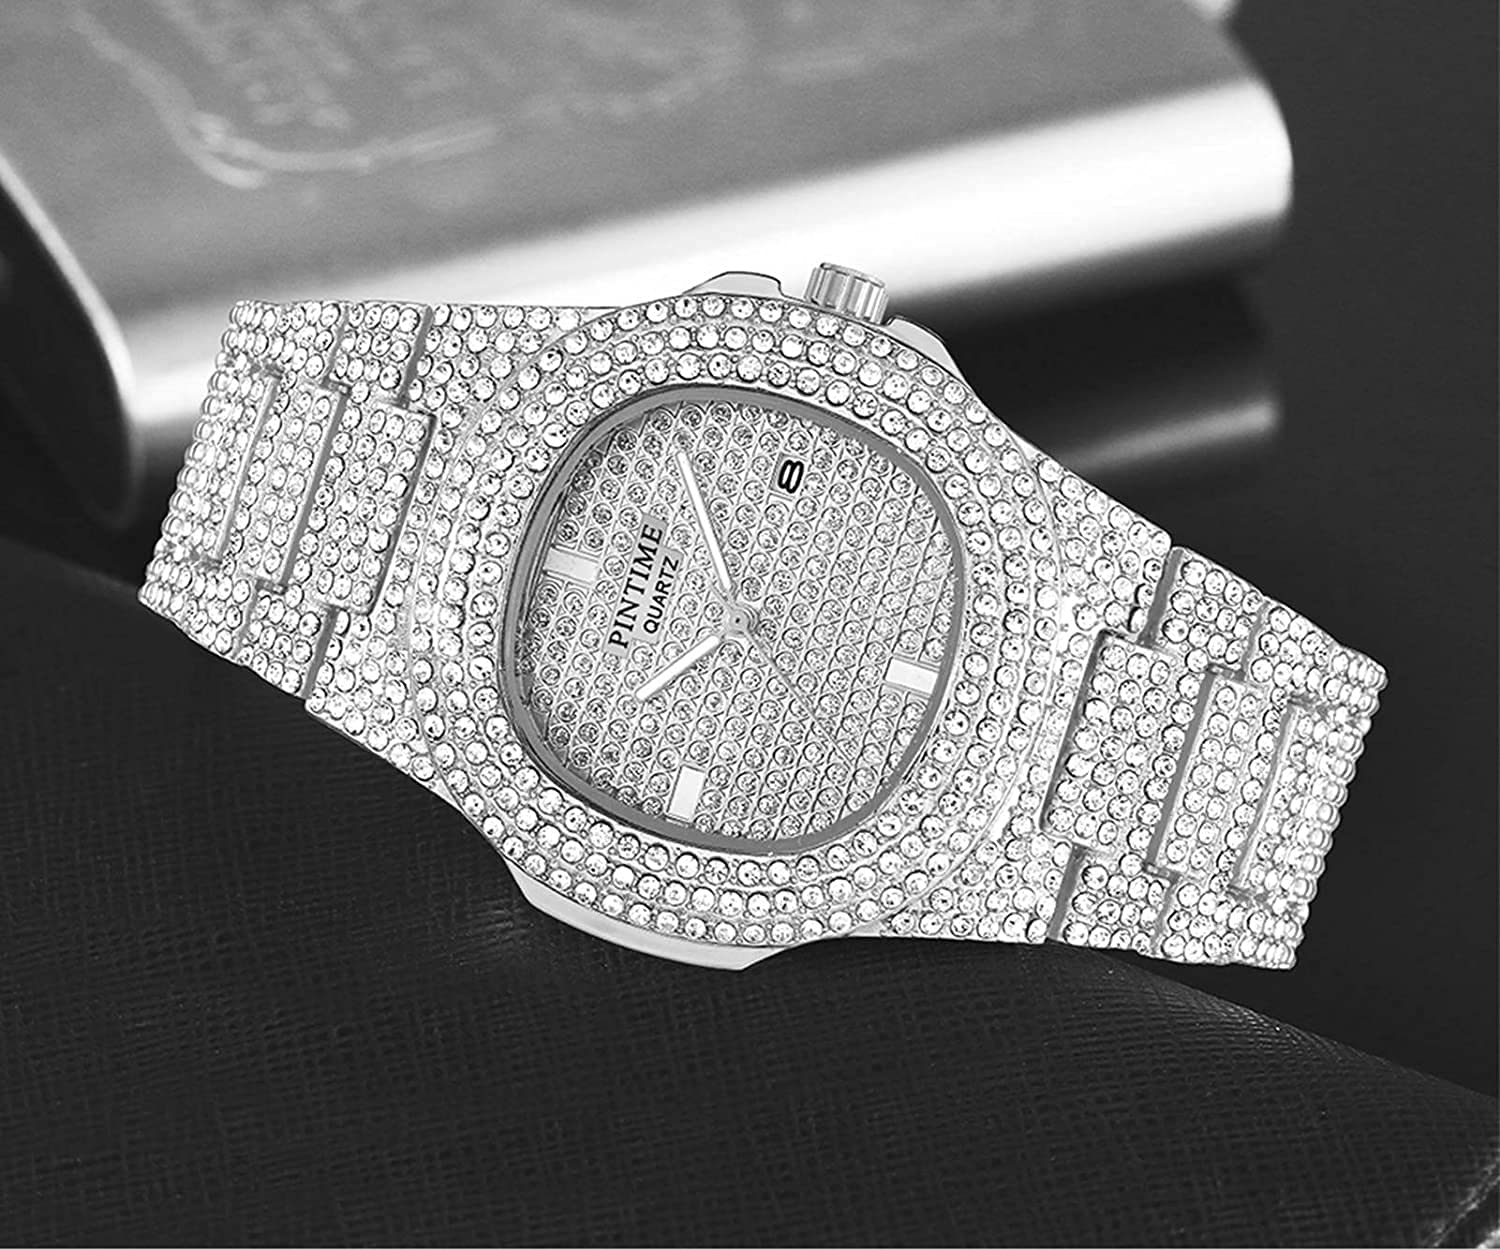 BESTKANG Fashion Unisex Crystal Diamond Watches Mens/Womens Luxury Bling-ed Out Gold Silver Stainless Steel Quartz Analog Wrist Watch